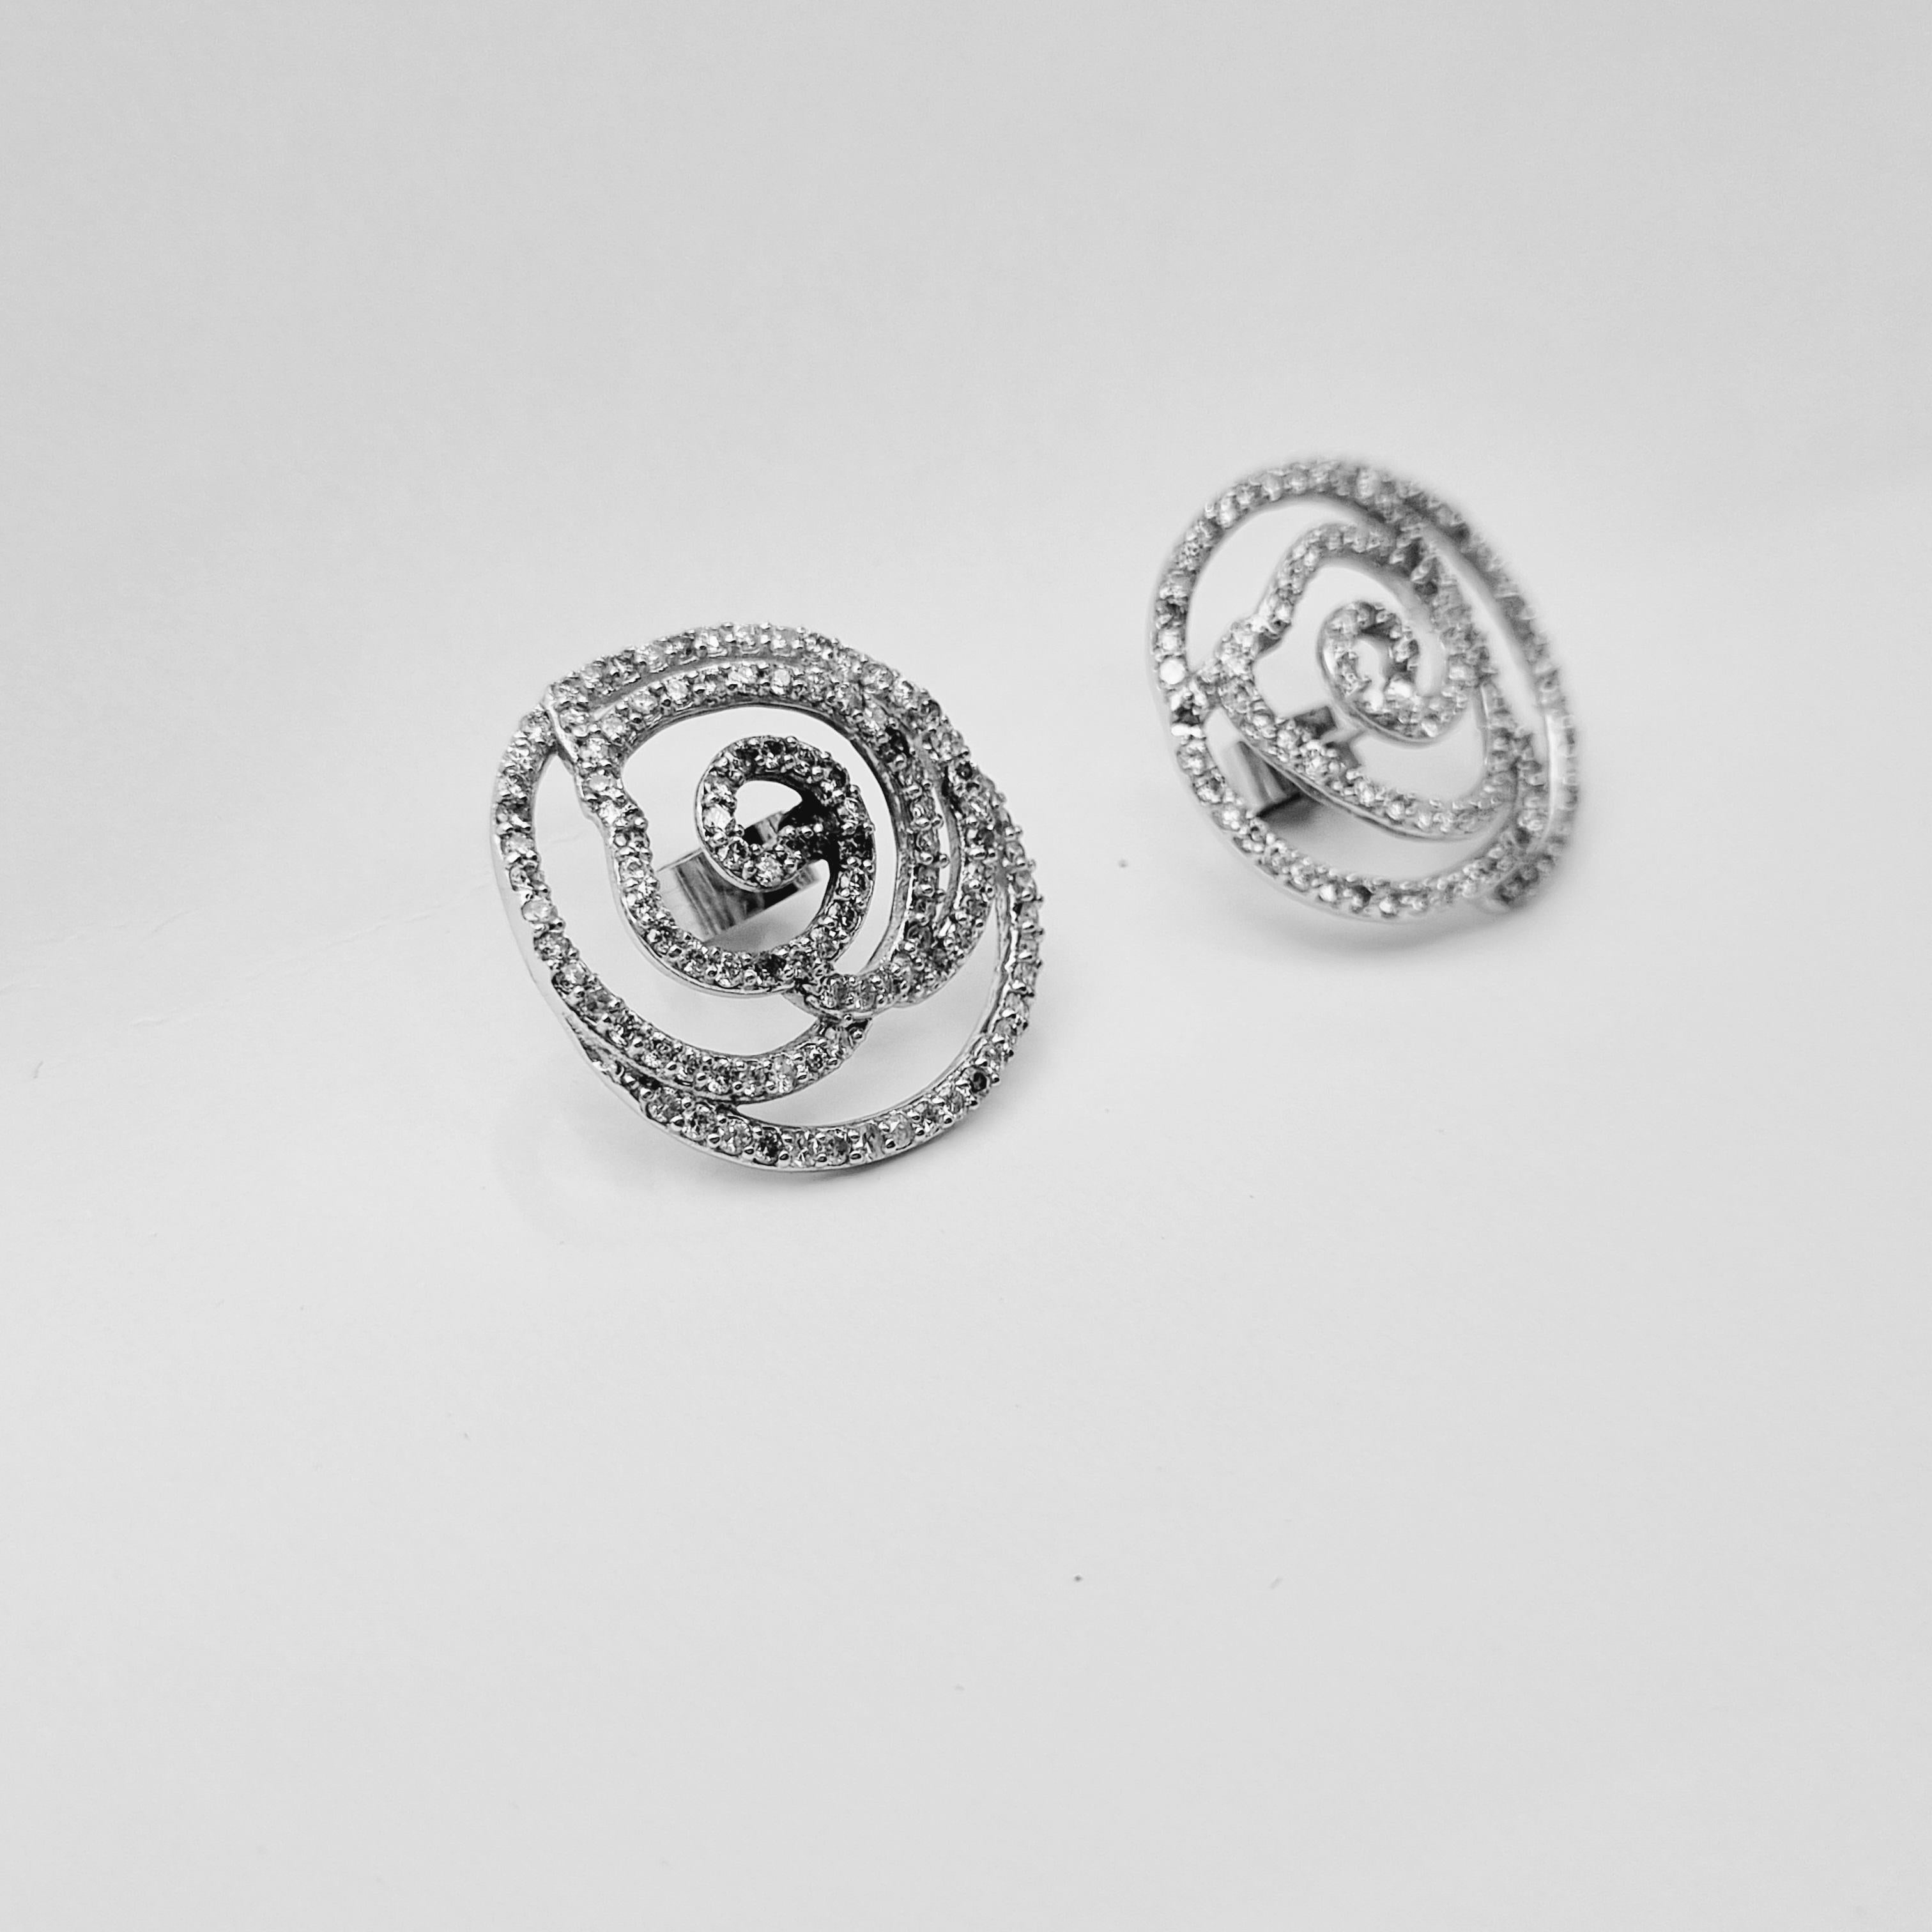 Romantic 2, 63 Ct Diamonds Pave Earrings, Floral Stud Earrings, 18k Solid White Gold For Sale